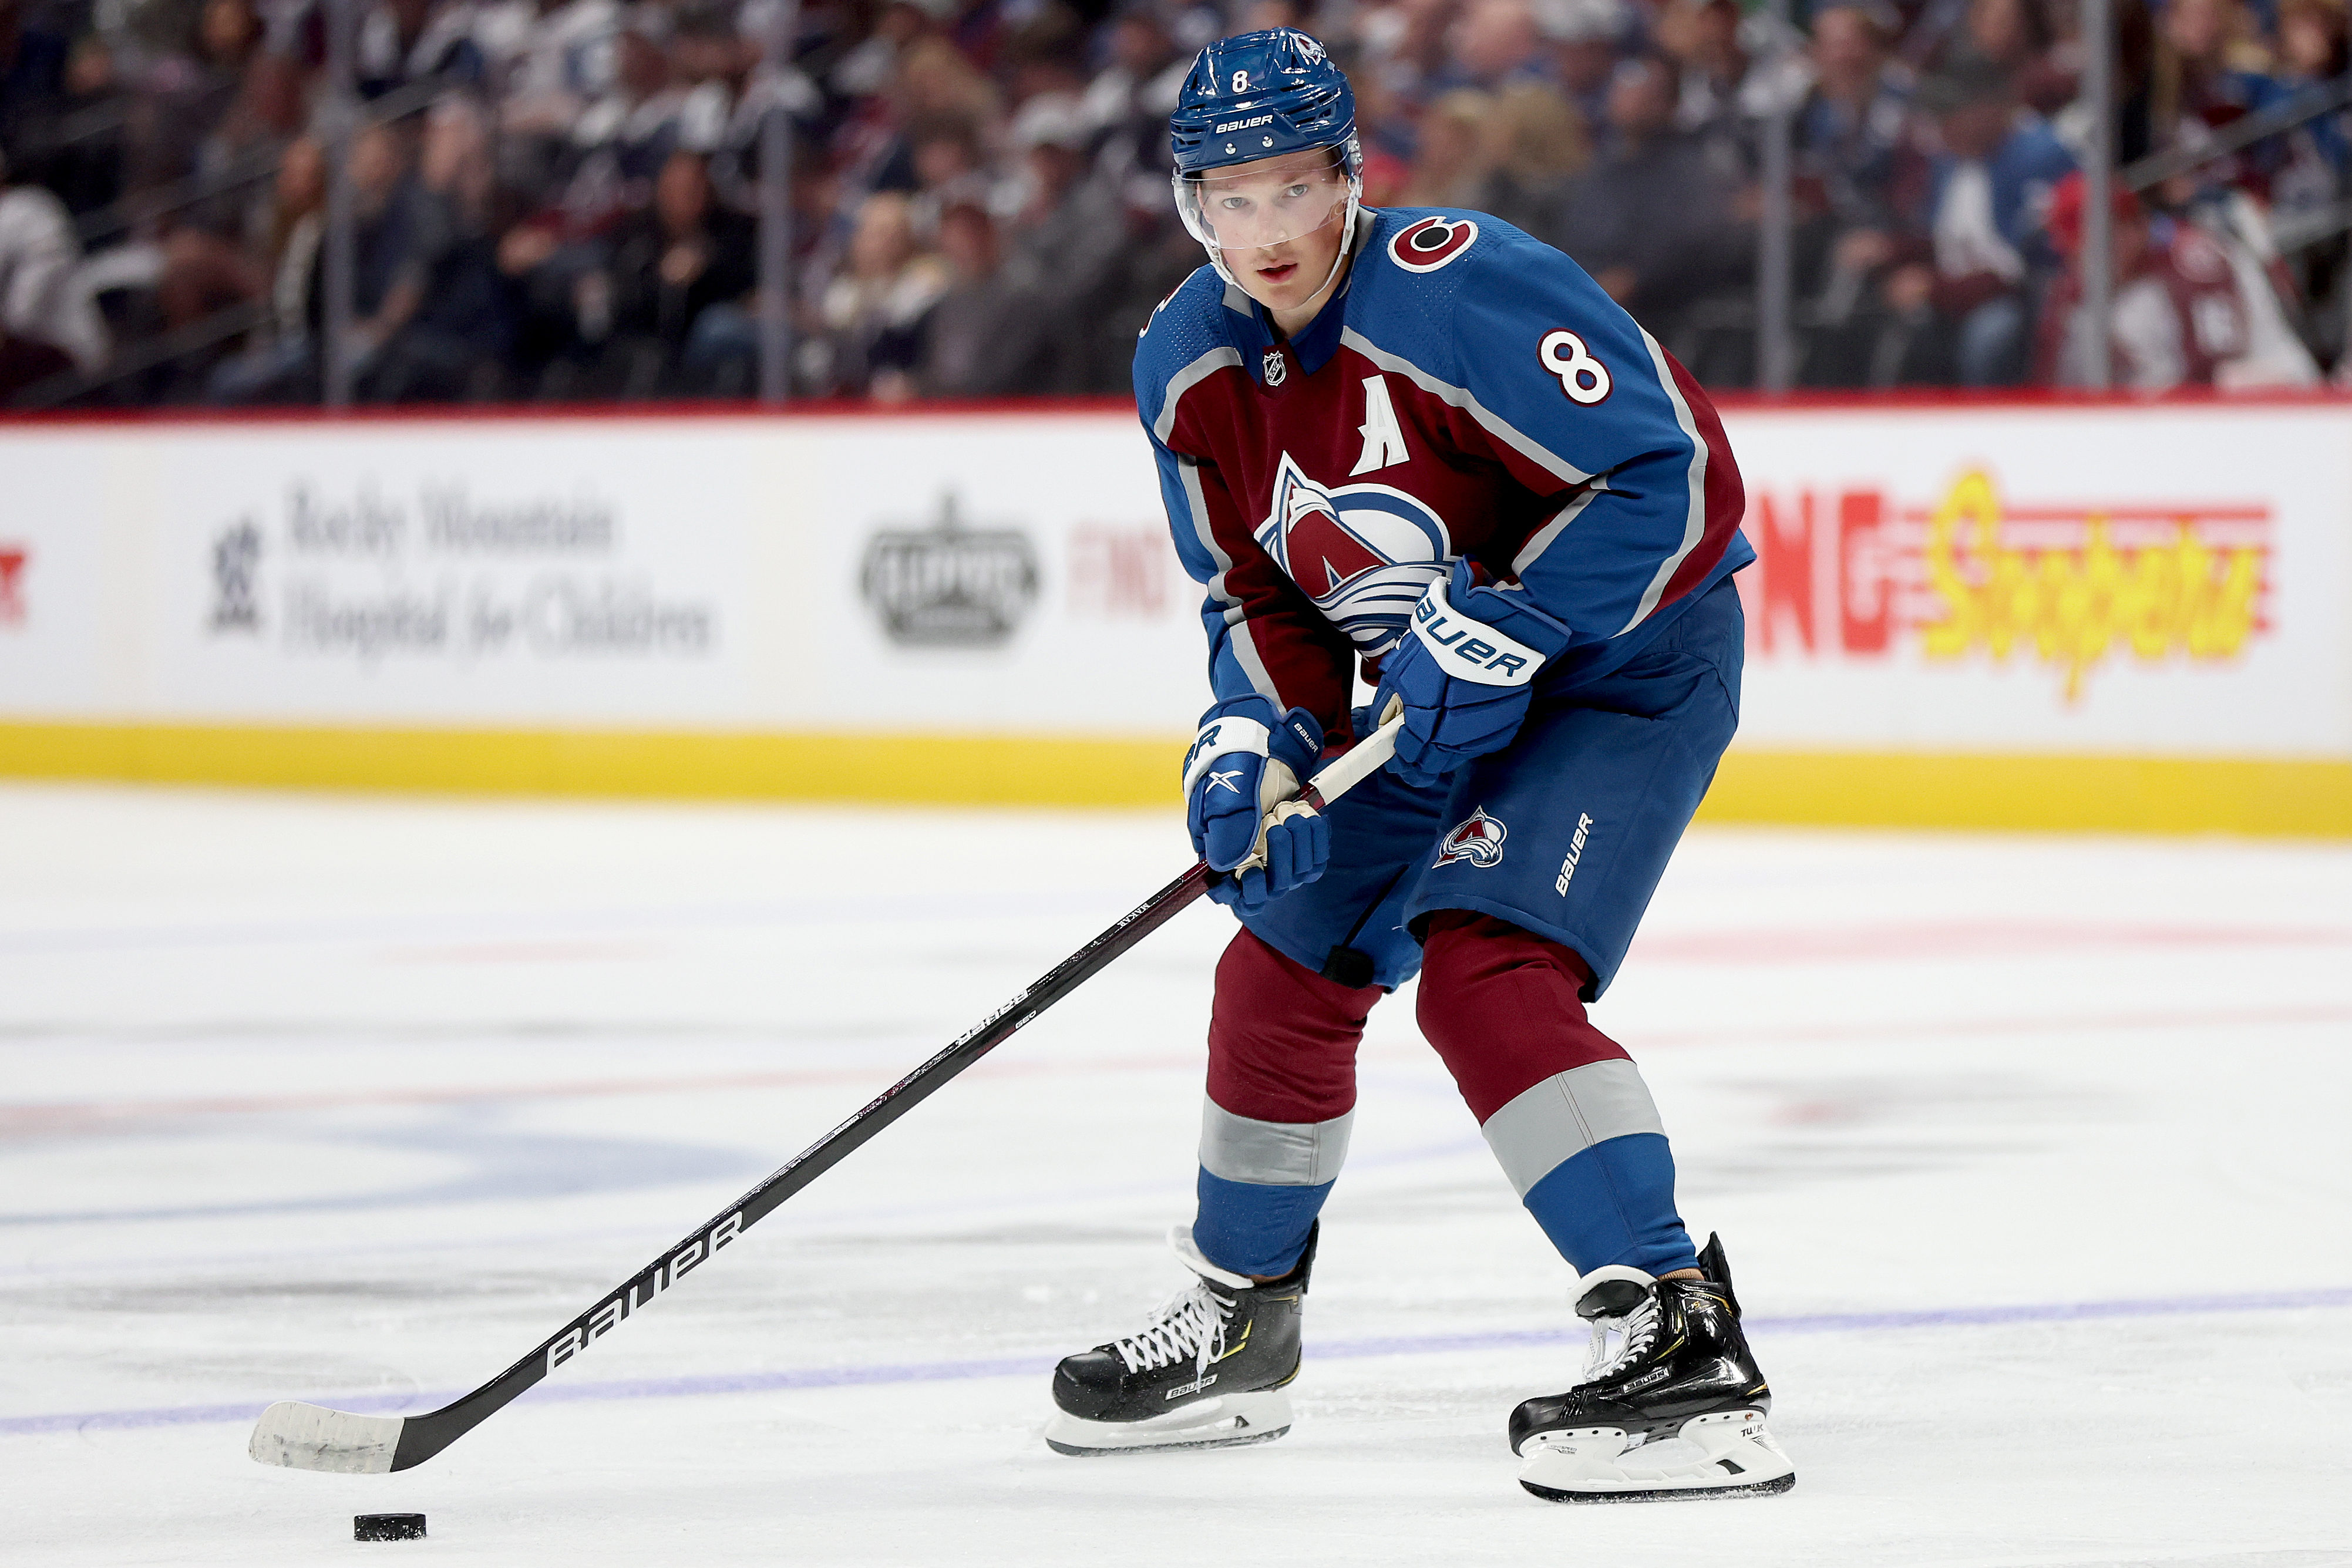 Cale Makar of the Colorado Avalanche looks for an opening against the Chicago Blackhawks during the second period at Ball Arena on October 12, 2022 in Denver, Colorado.